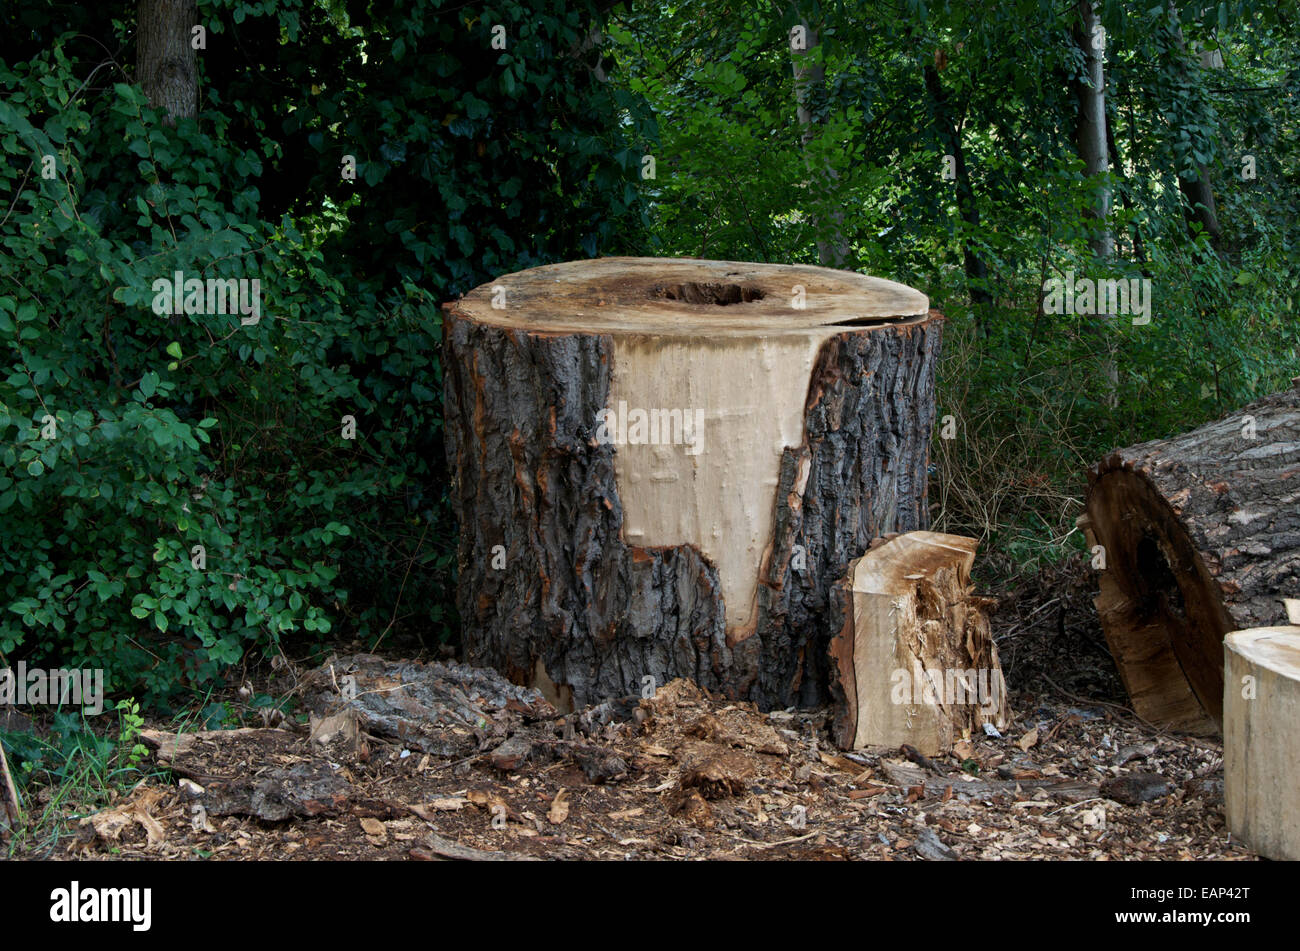 A felled tree trunk cut into large sections in a wooded area. Stock Photo